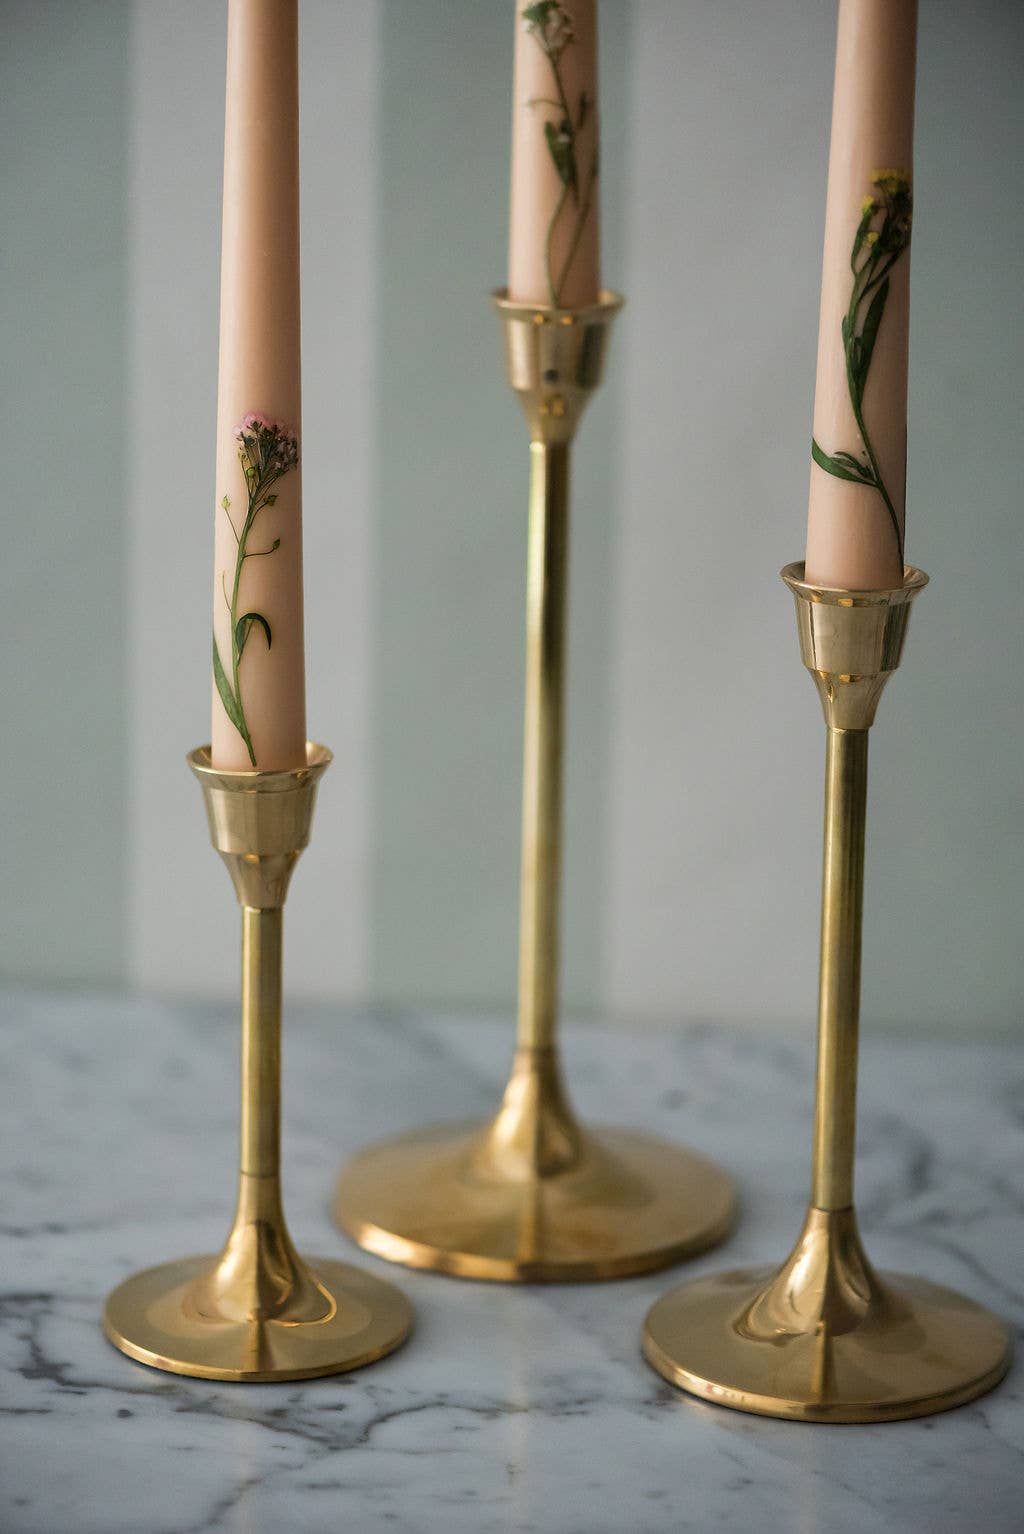 Floral Inlaid Tapered Candles - Set of 3